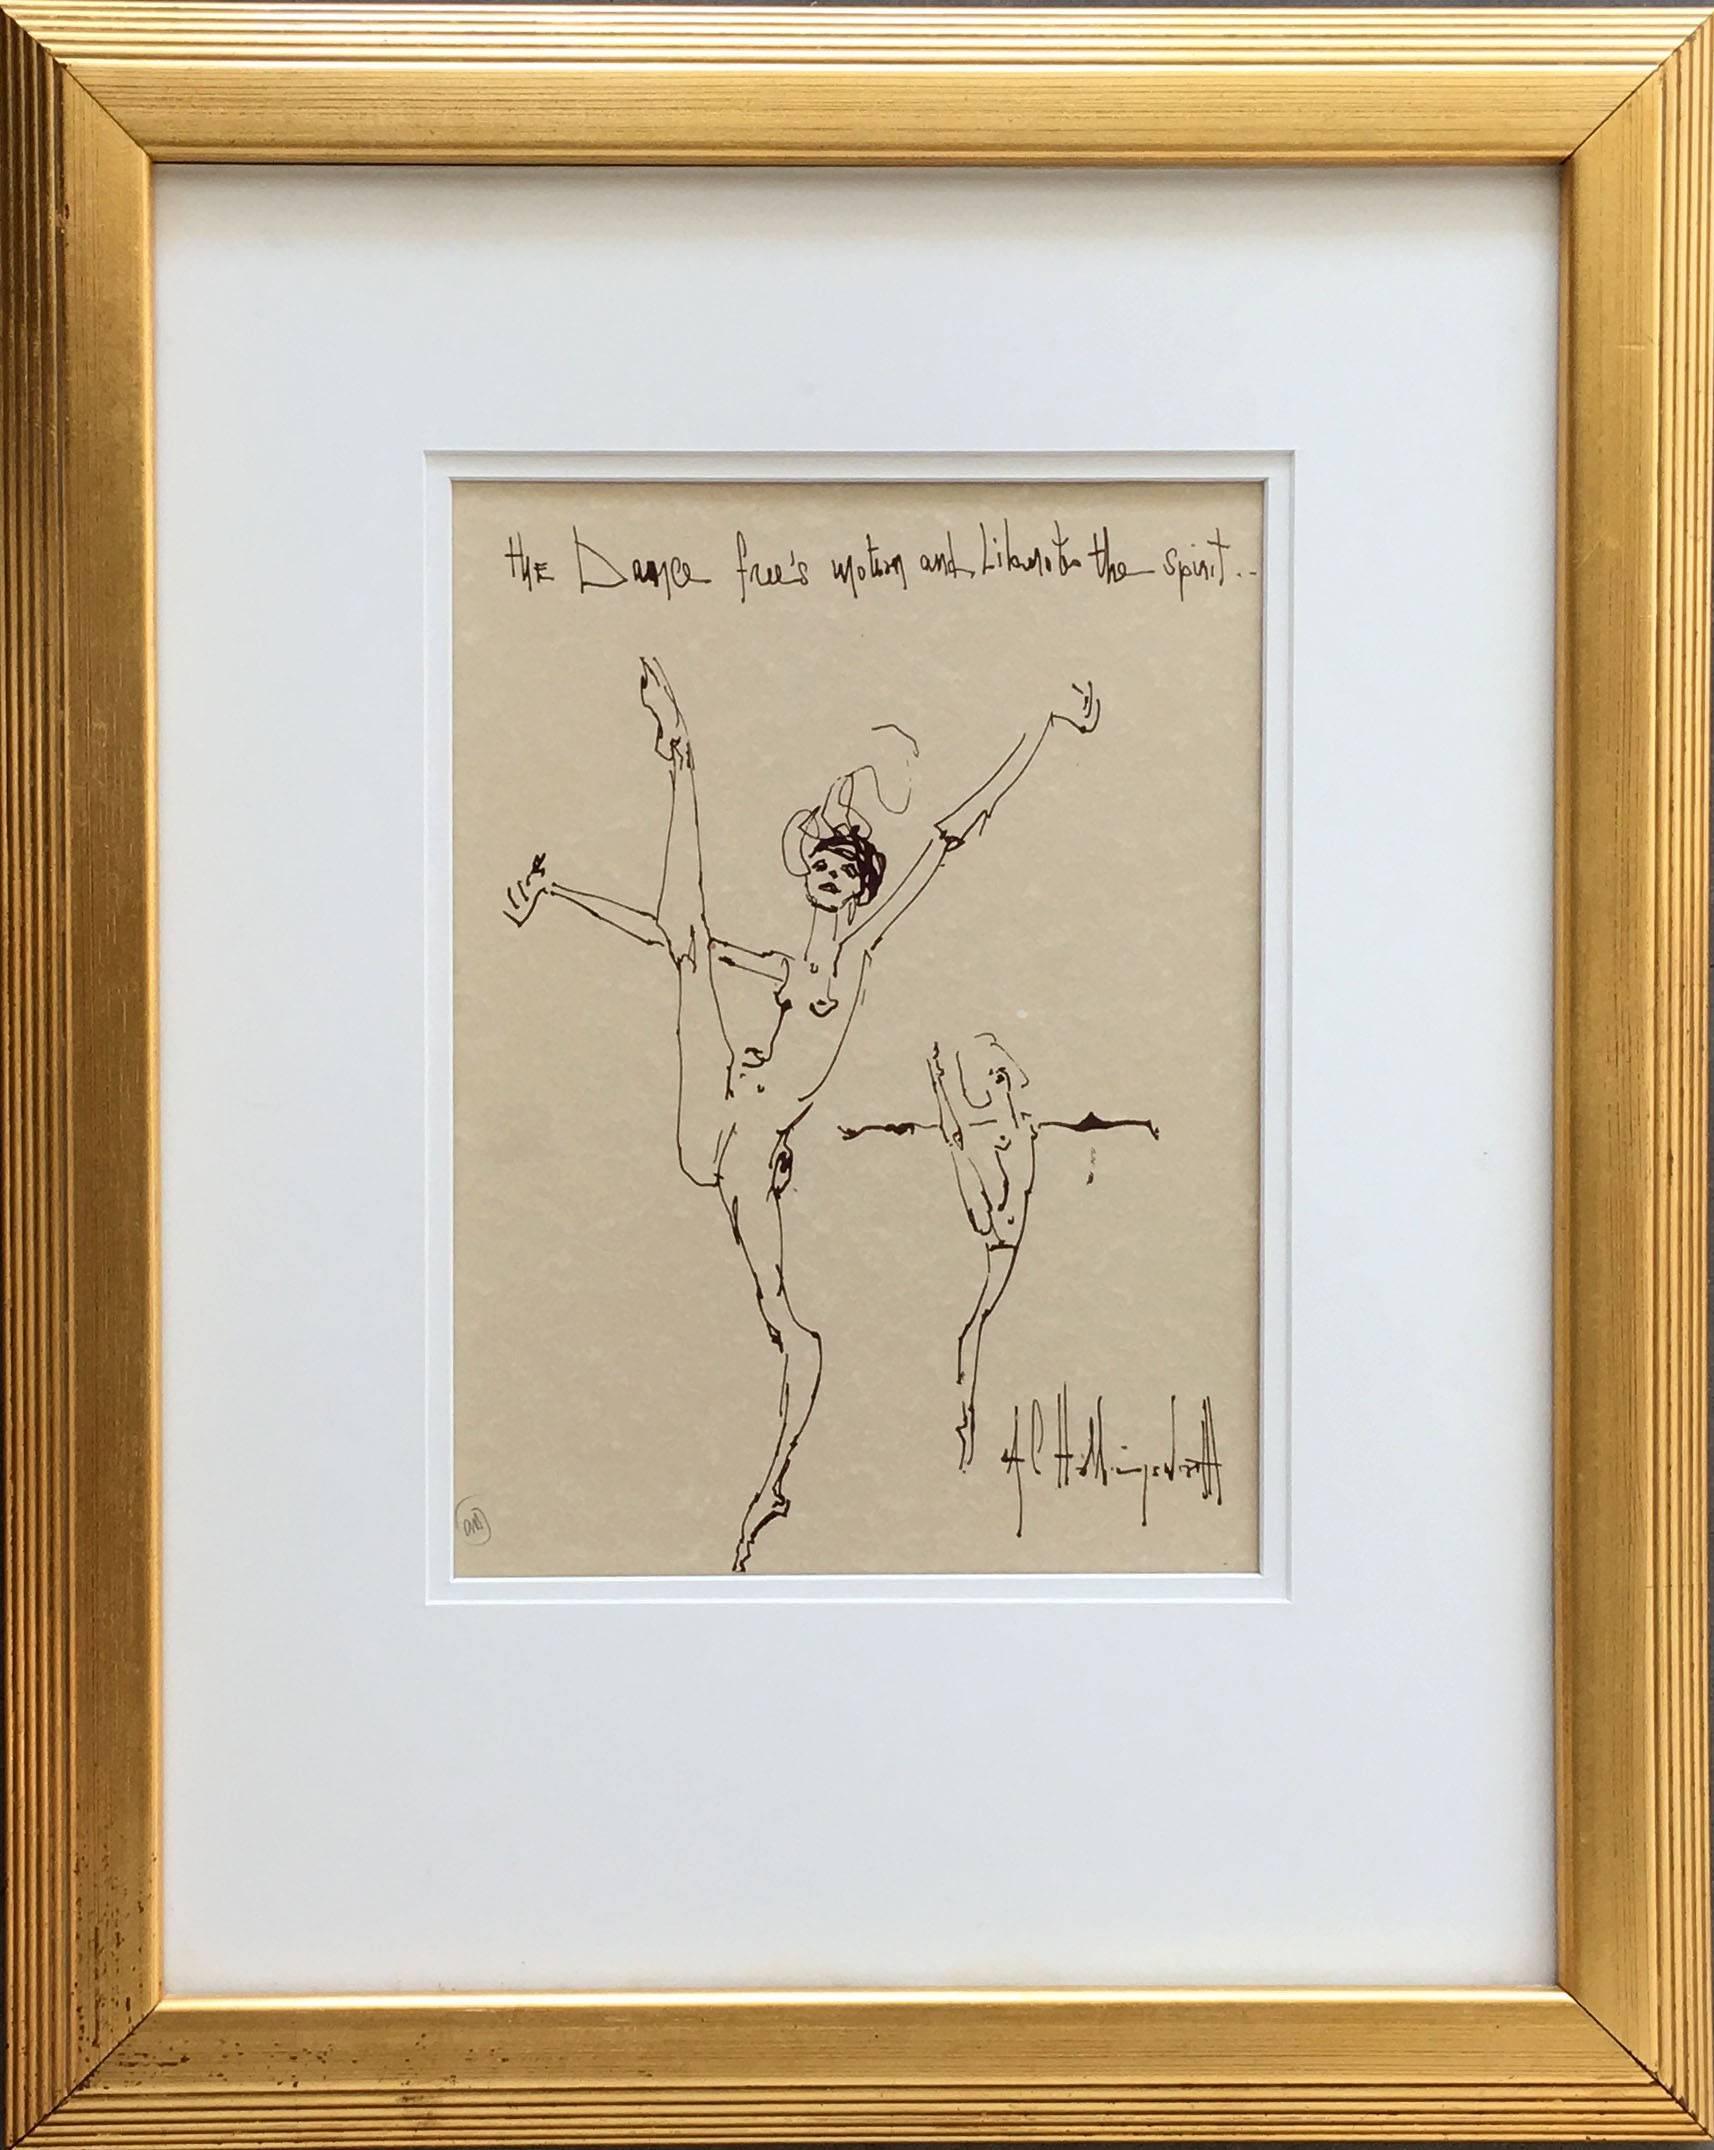 Alvin C. Hollingsworth Figurative Print - The Dance Free's Emotion and Liberates the Spirit